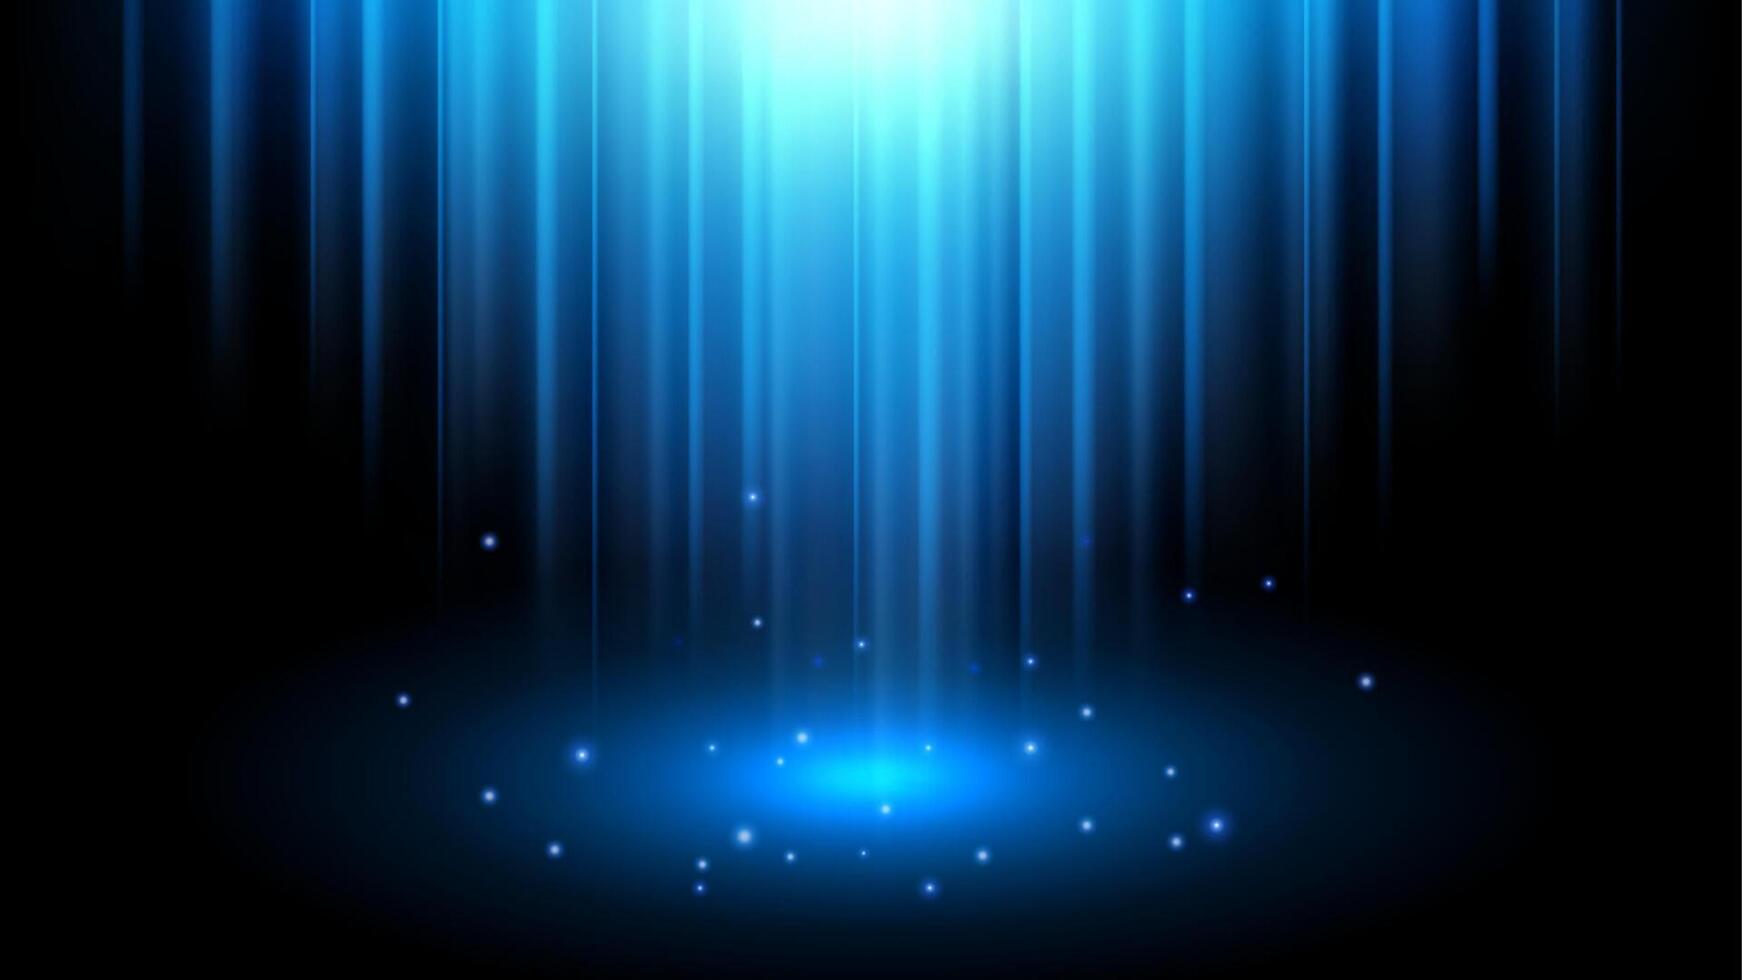 Abstract Blue Light Rays Effect With Sparks, Vector Illustration